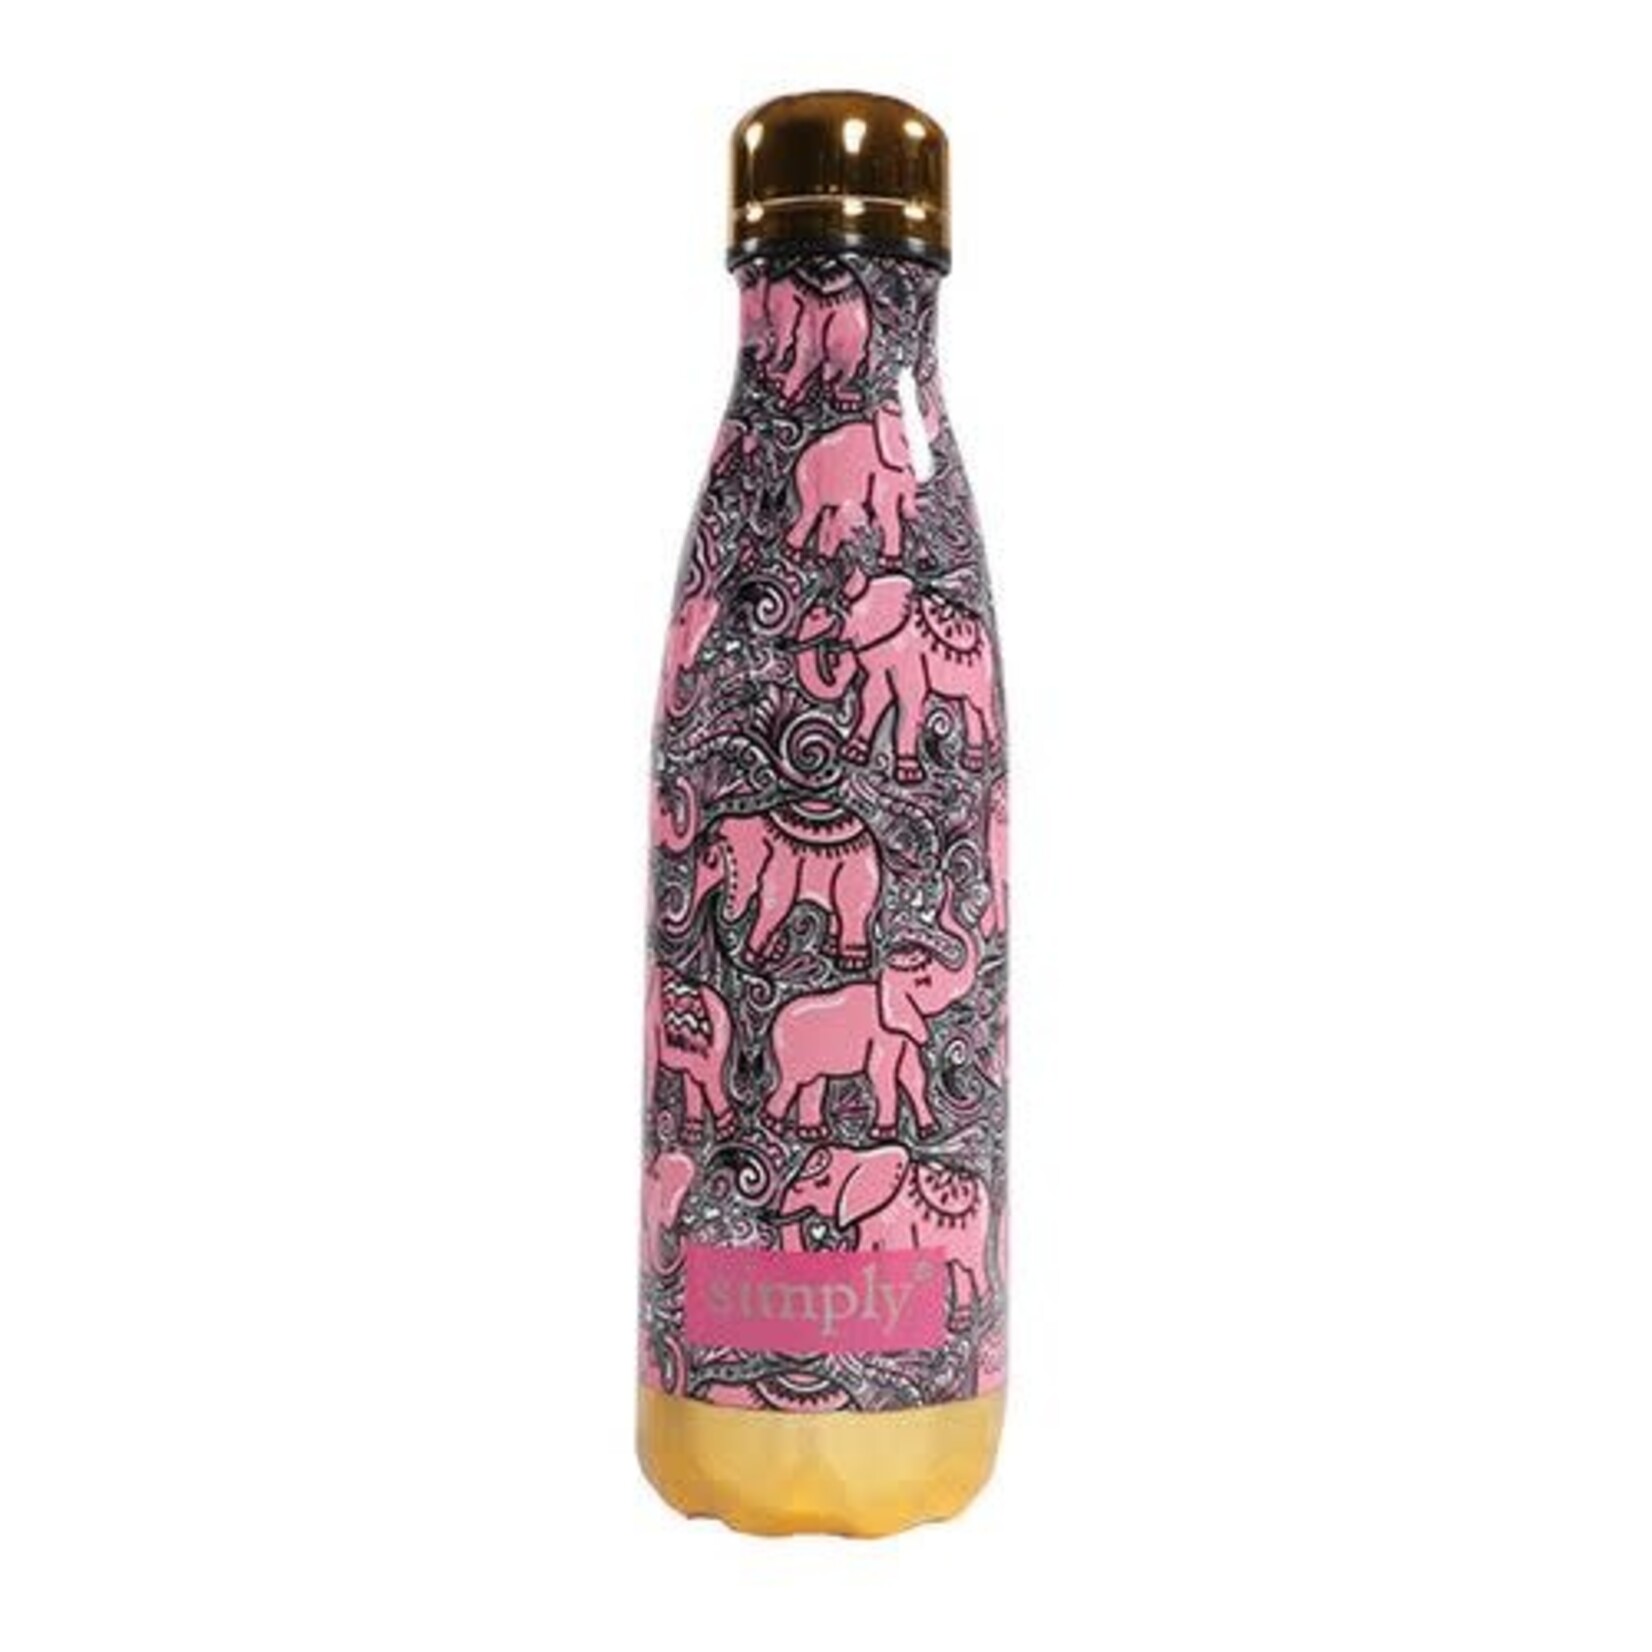 Simply Southern SS Water Bottle-Patterned